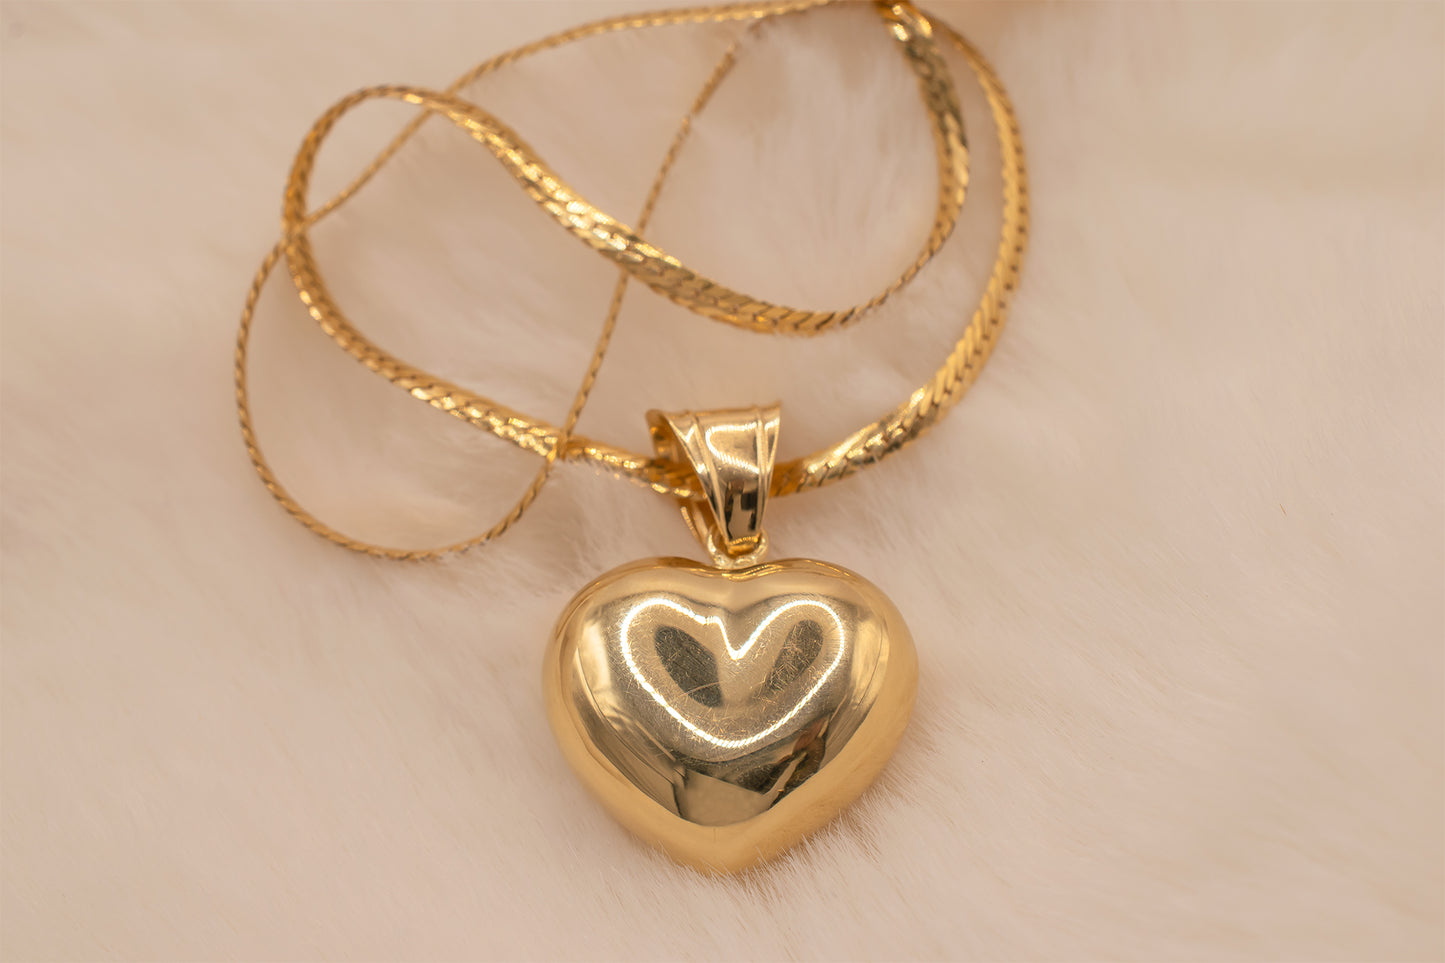 Vintage 14KT Yellow Gold Milor Italy Puffy Heart Pendant